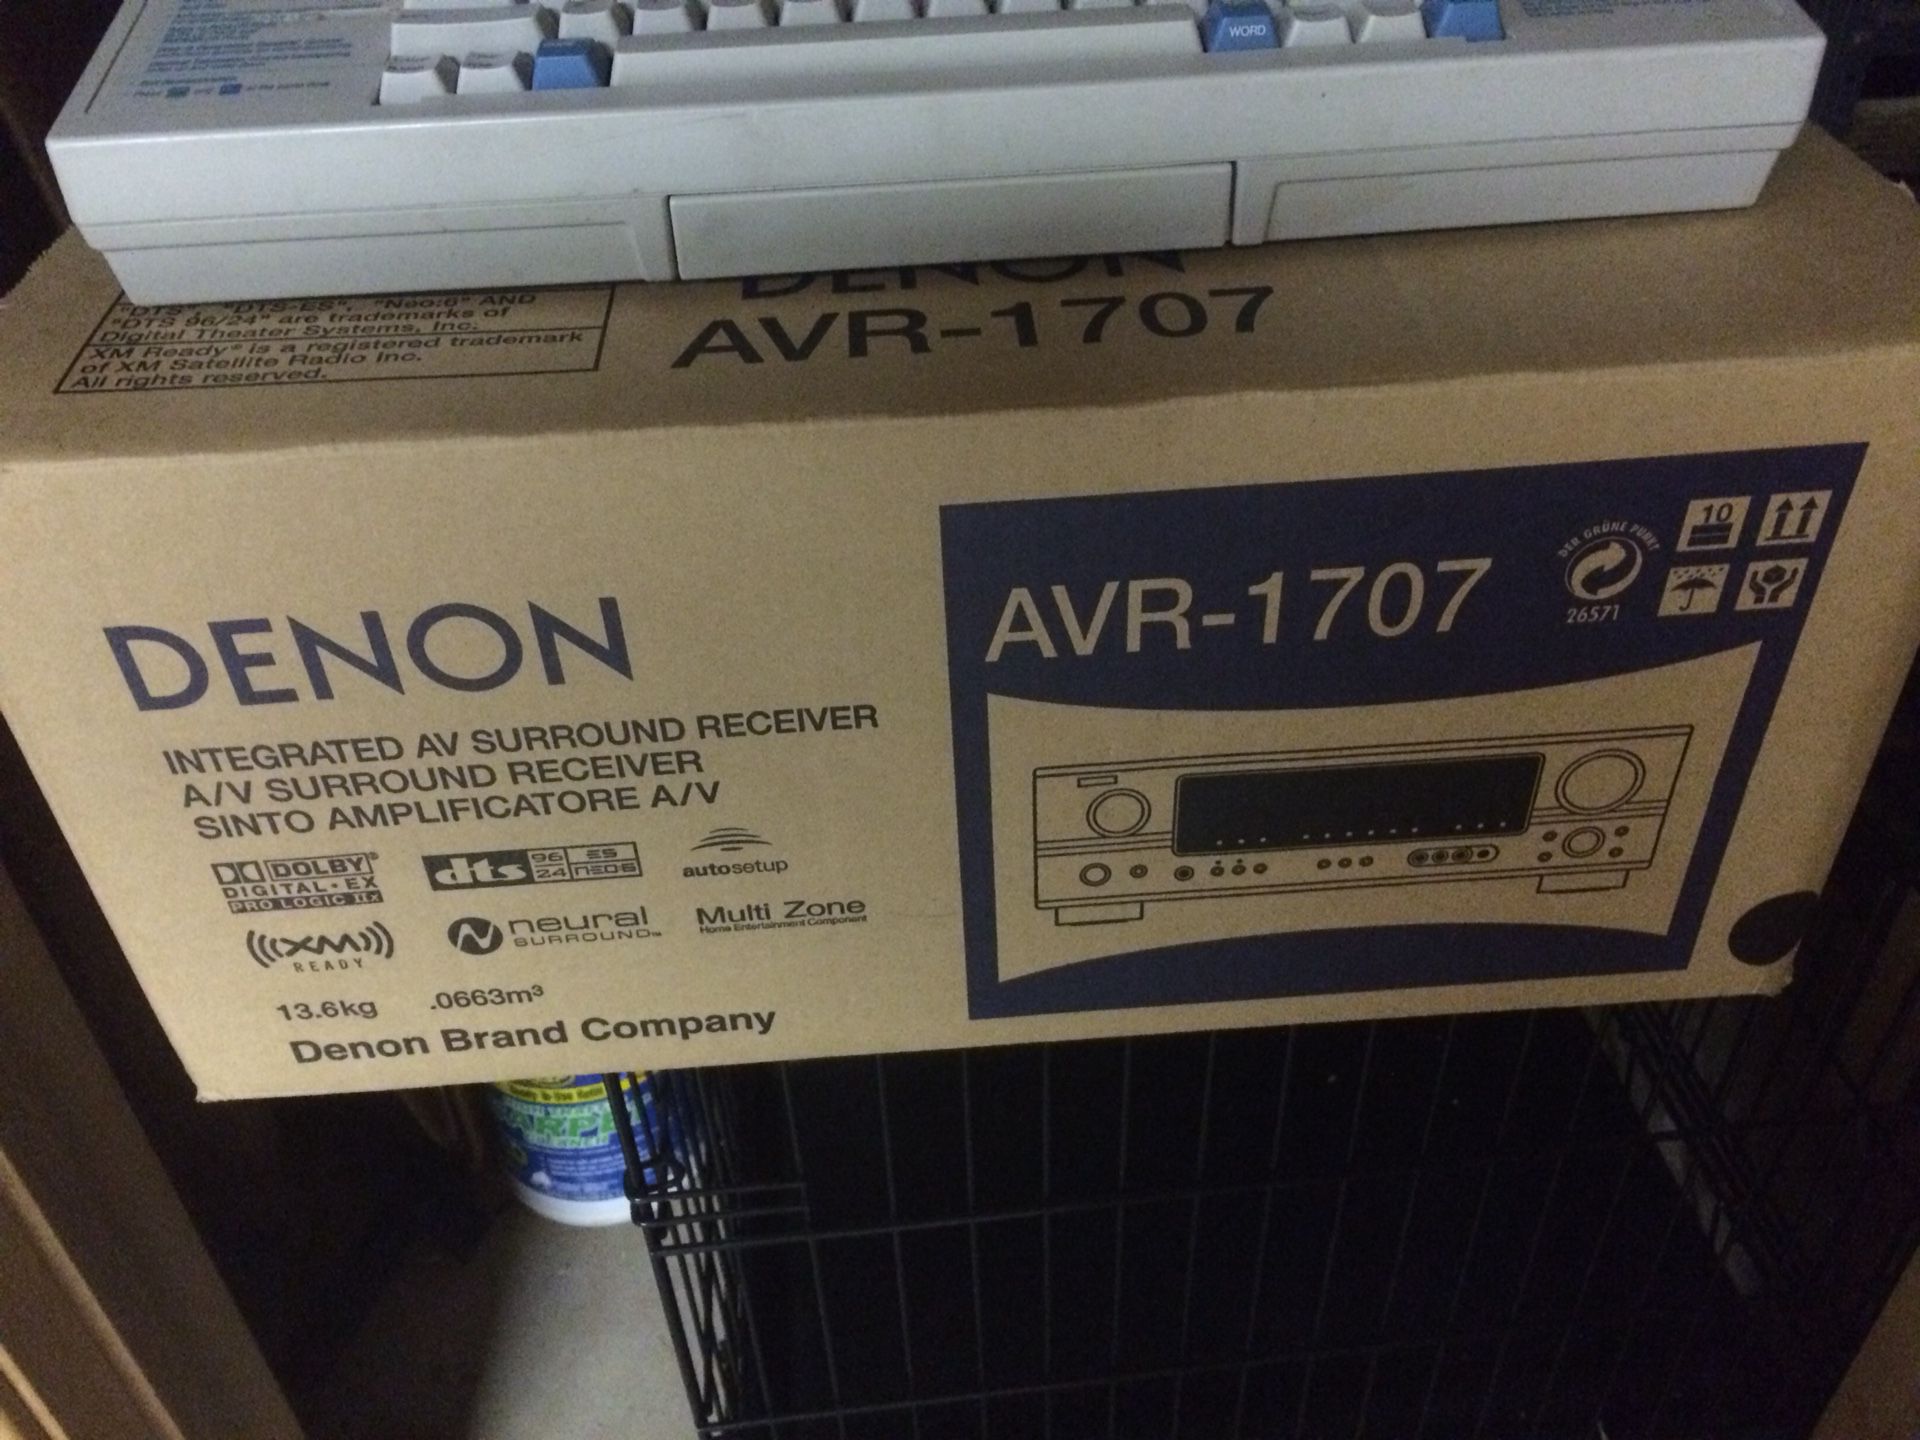 SELLING: ALMOST NEW DENON AVR-1707 SURROUND SOUND AUDIO RECEIVER 7.1 CHANNELS